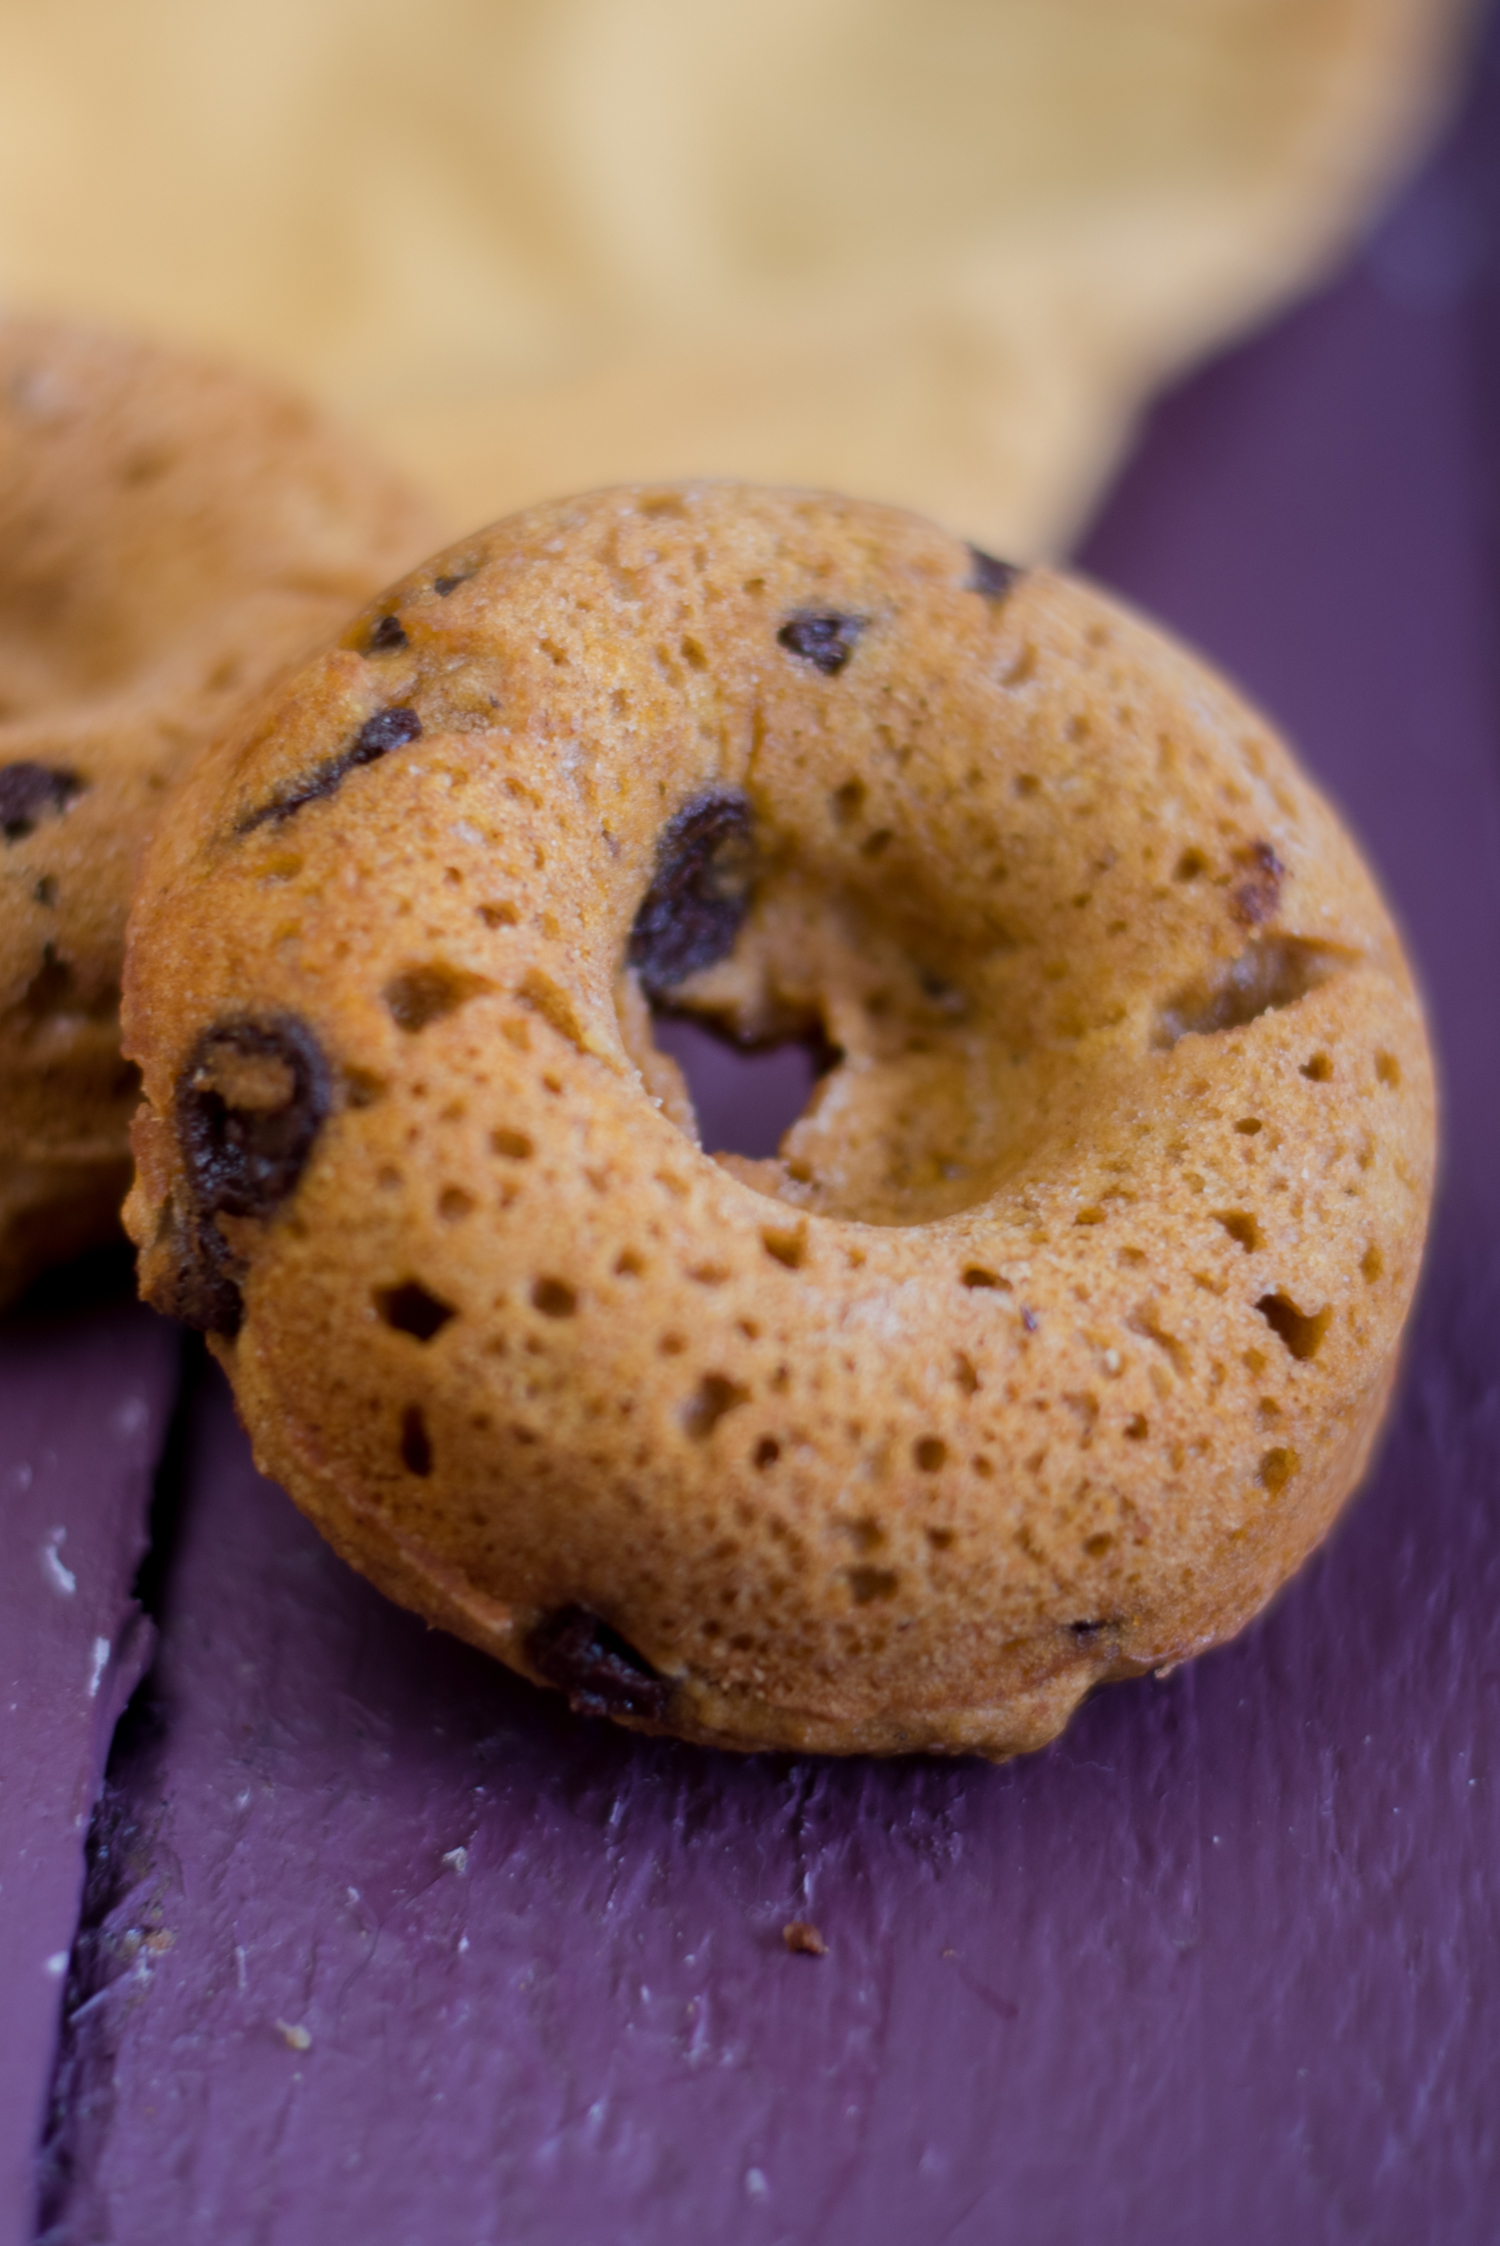 These Baked Pumpkin Spice Chocolate Chip Donuts are fluffy, light, and perfect for fall! #vegan #fall #recipes #breakfast #pumpkin